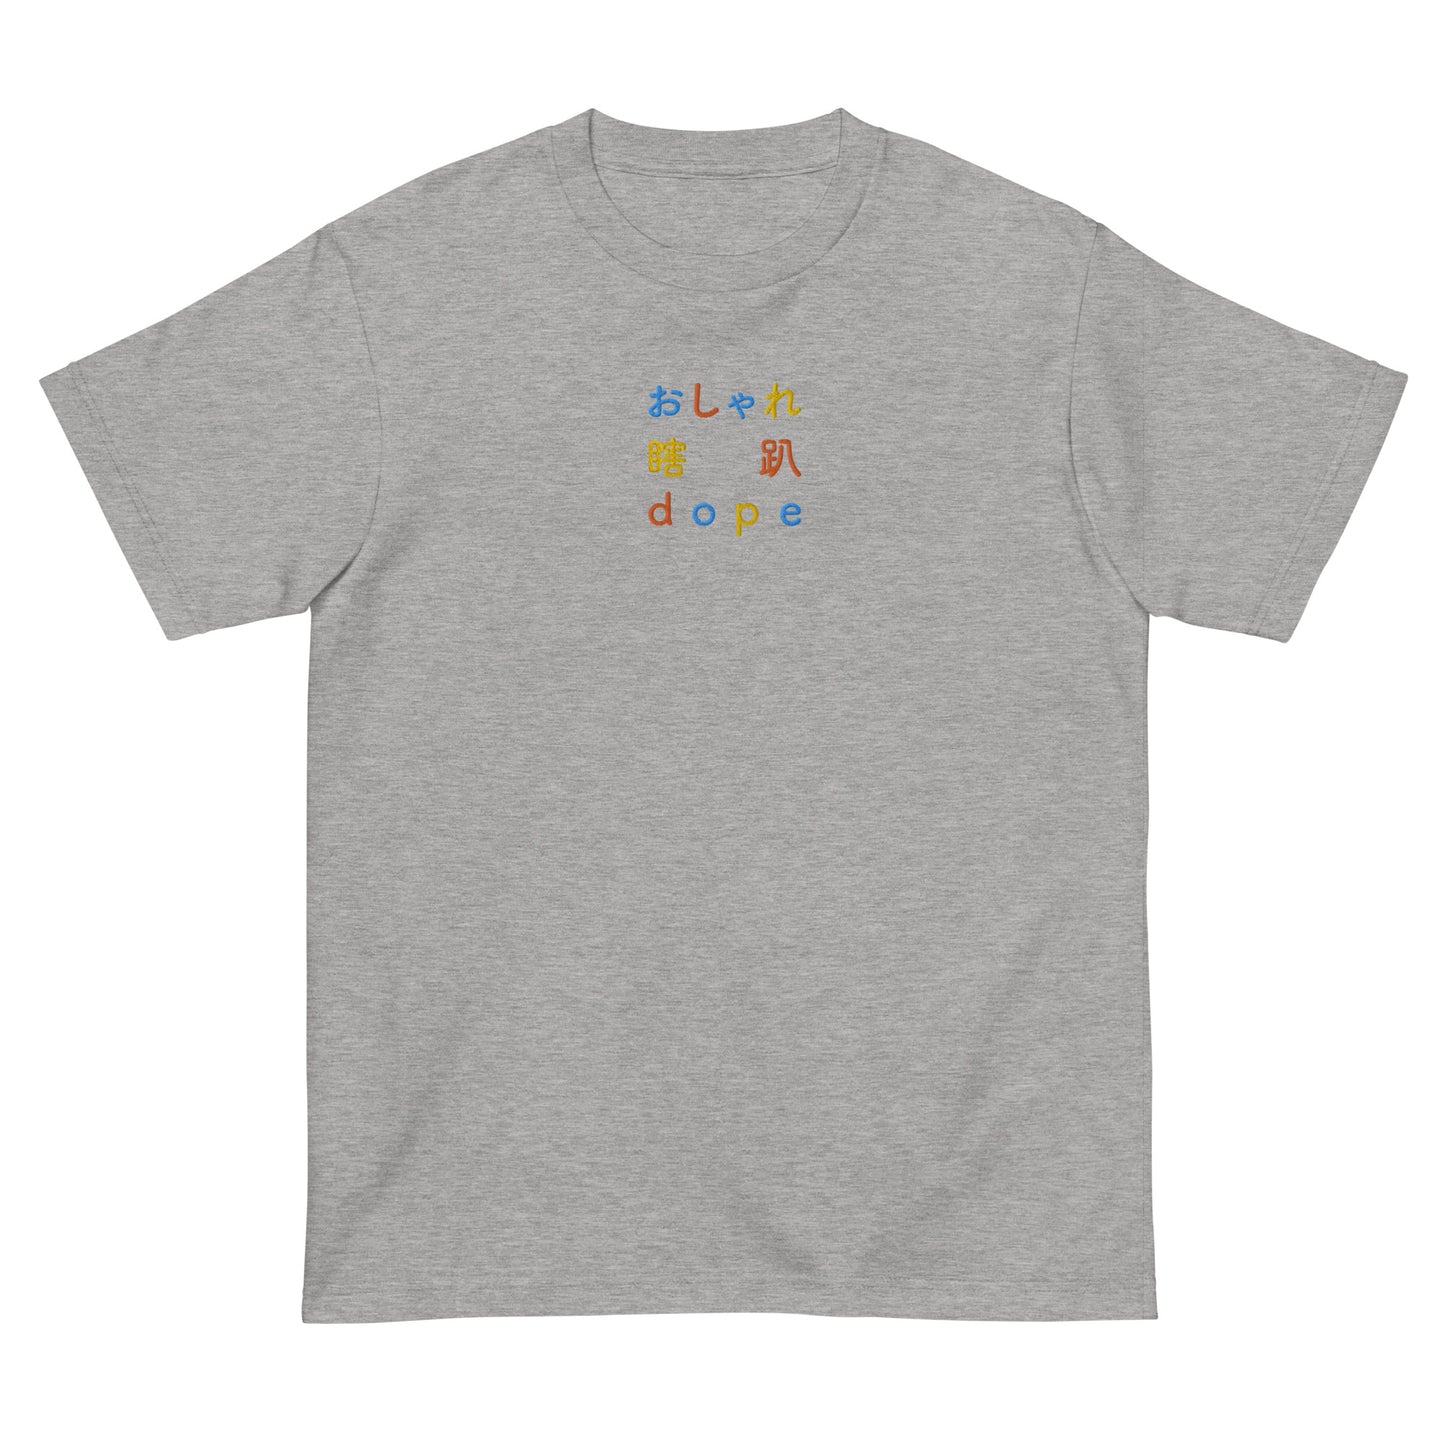 Light Gray High Quality Tee - Front Design with an Blue, Orange, Yellow Embroidery "Dope" in Japanese,Chinese and English